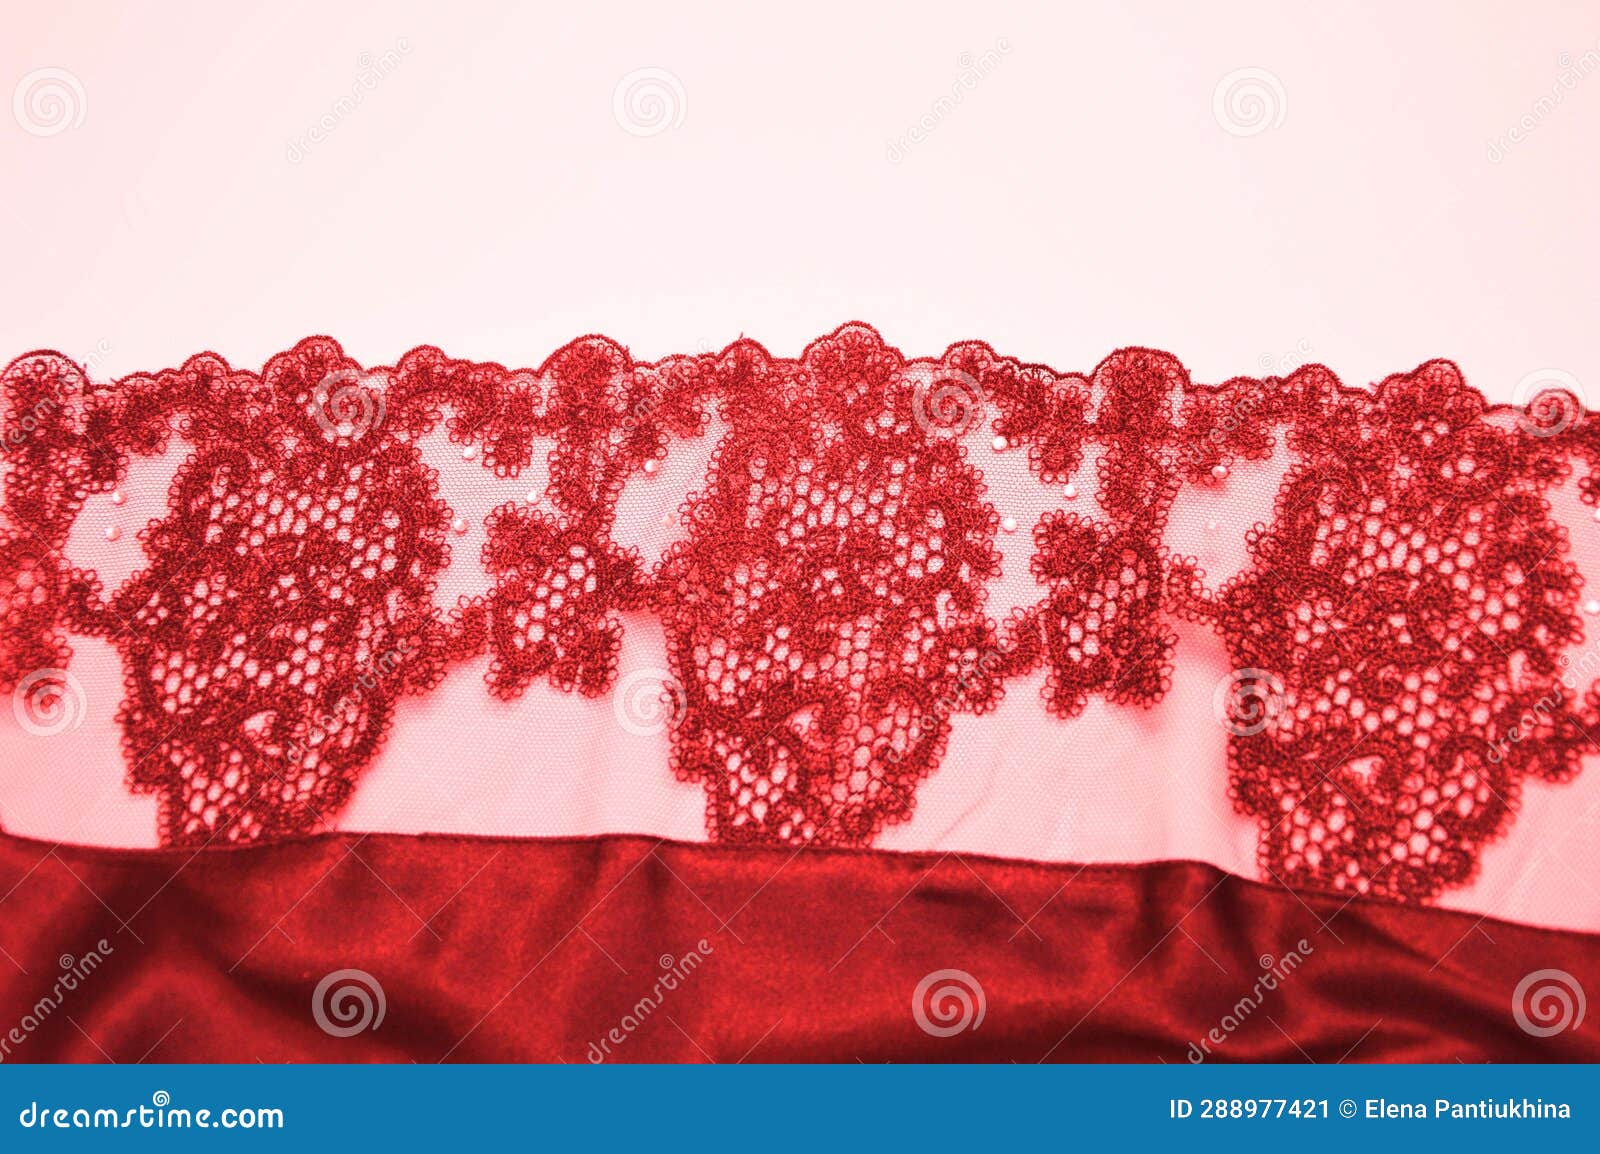 red lace with an openwork pattern on a white background. finishing  of lingerie, negligee